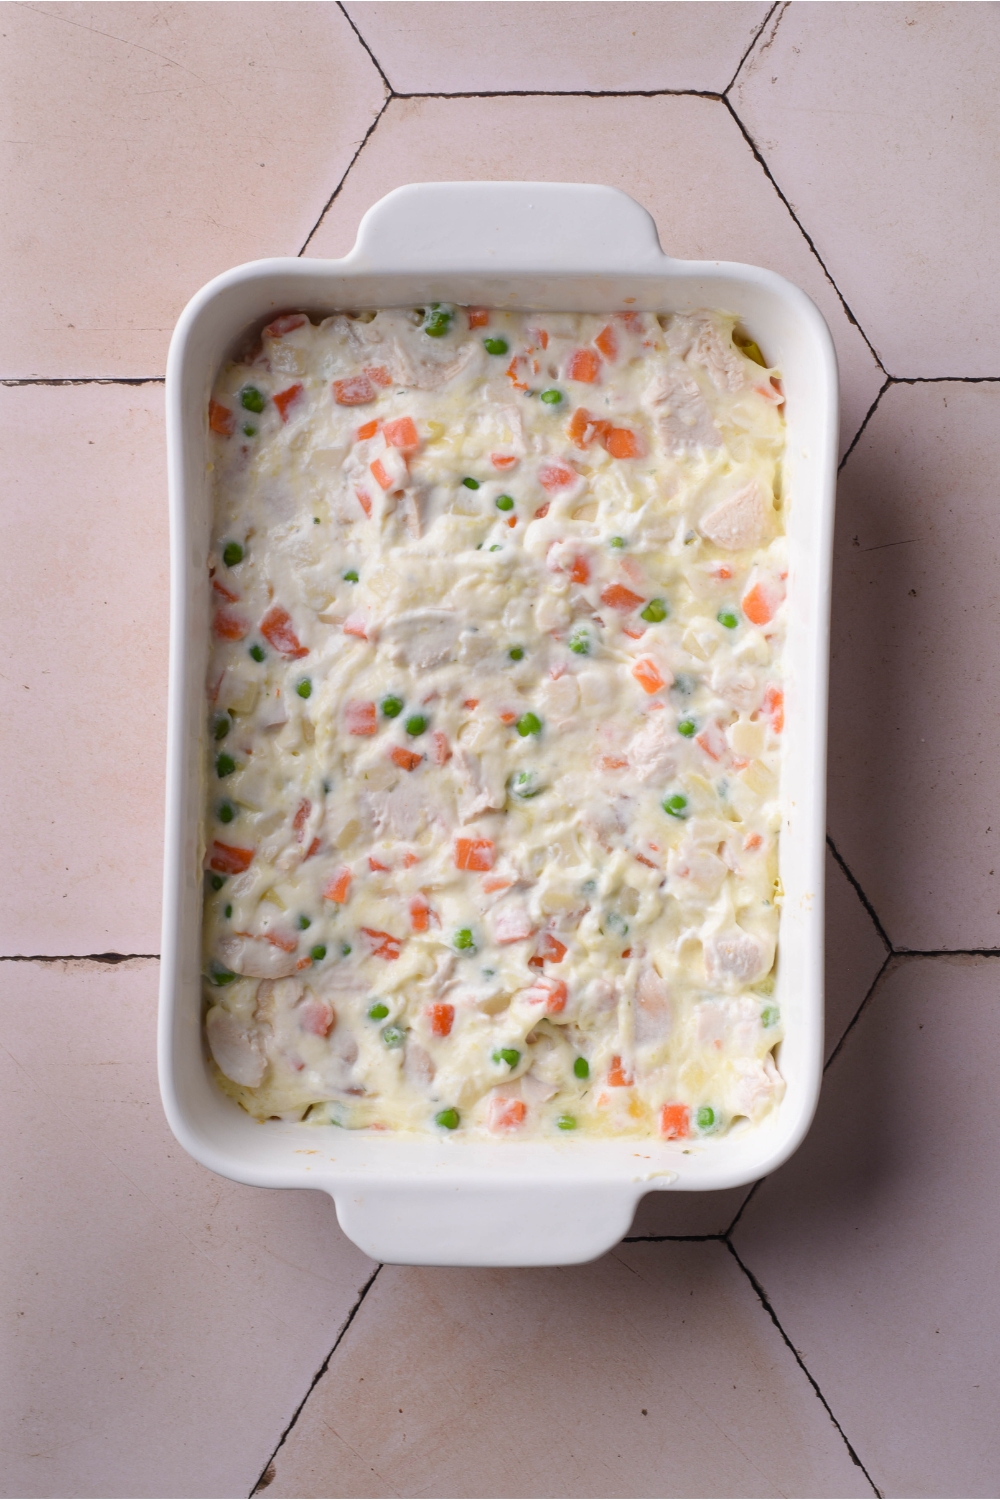 A white baking dish filled with a mixture of creamy soup, diced carrots, peas, and diced chicken.